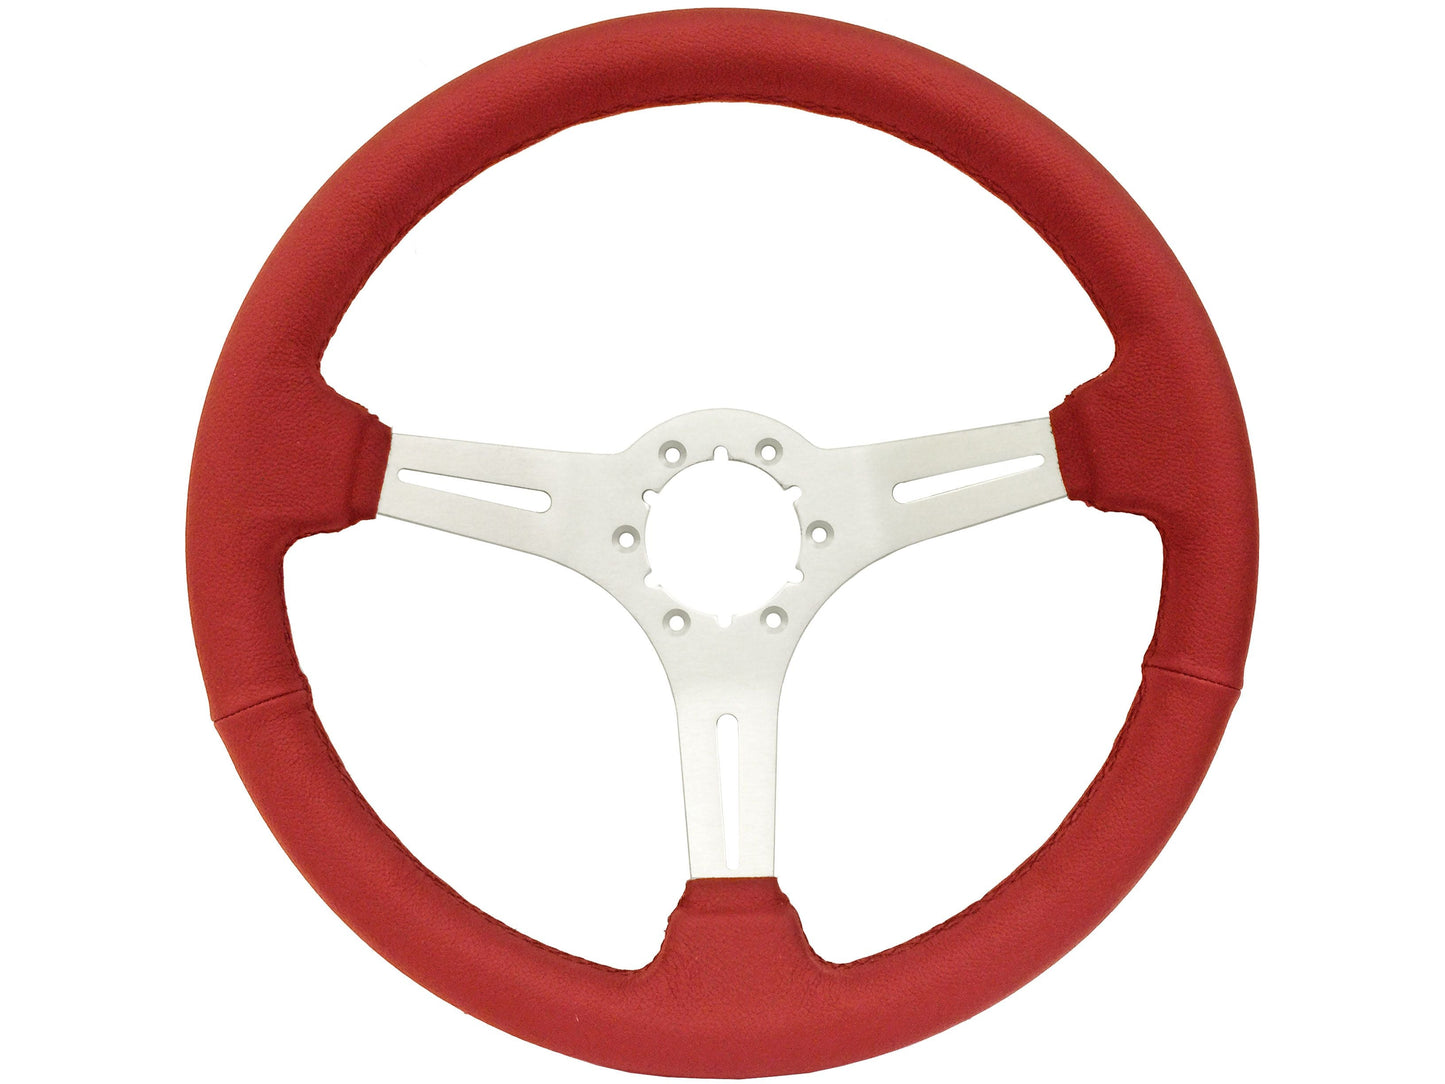 1978-91 Ford Bronco Steering Wheel Kit | Red Leather | ST3014RED